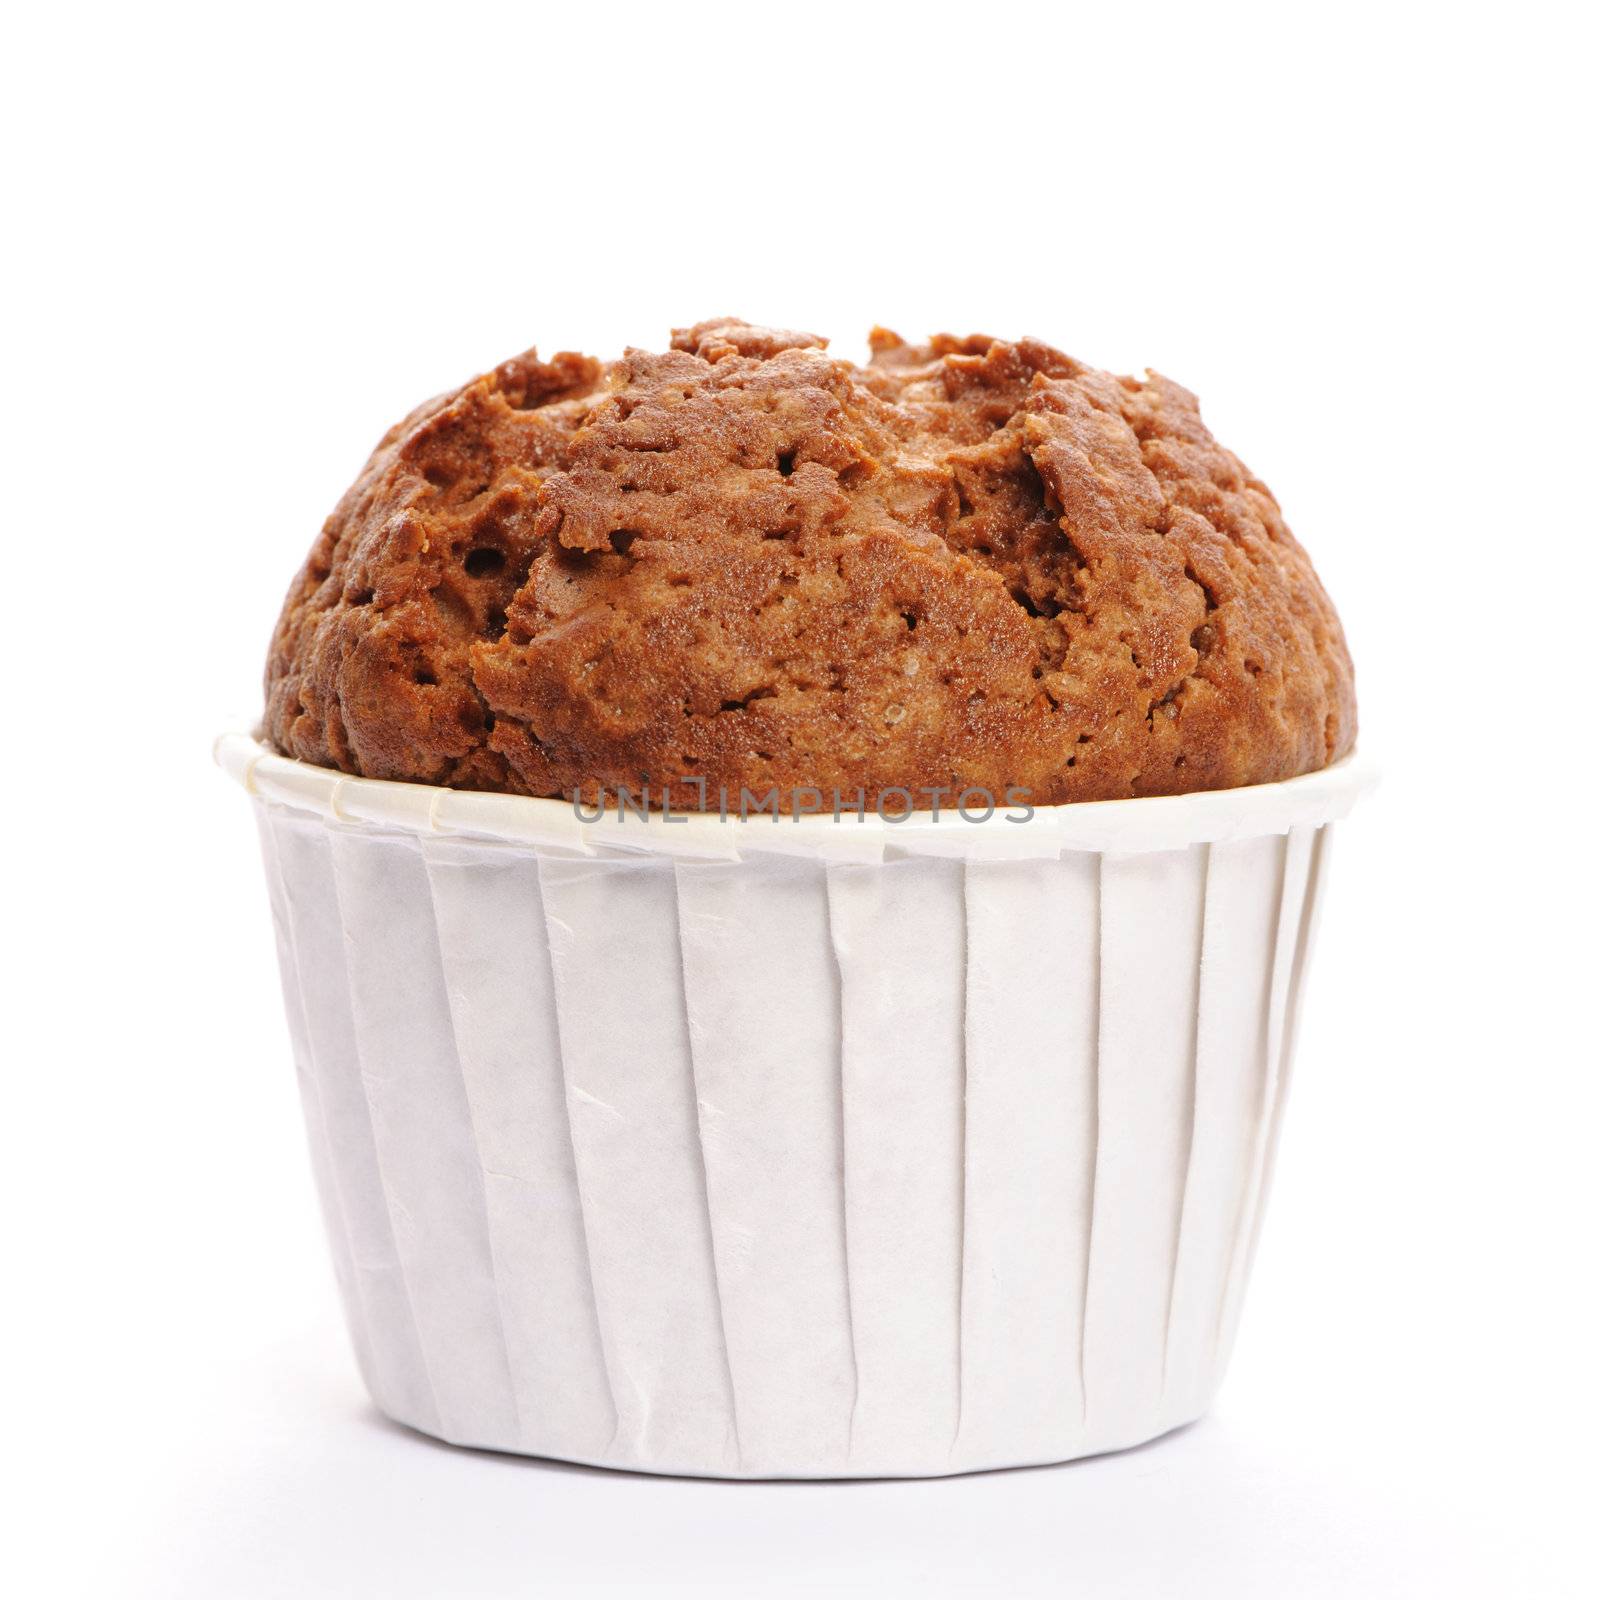 Muffin isolated on white by haveseen